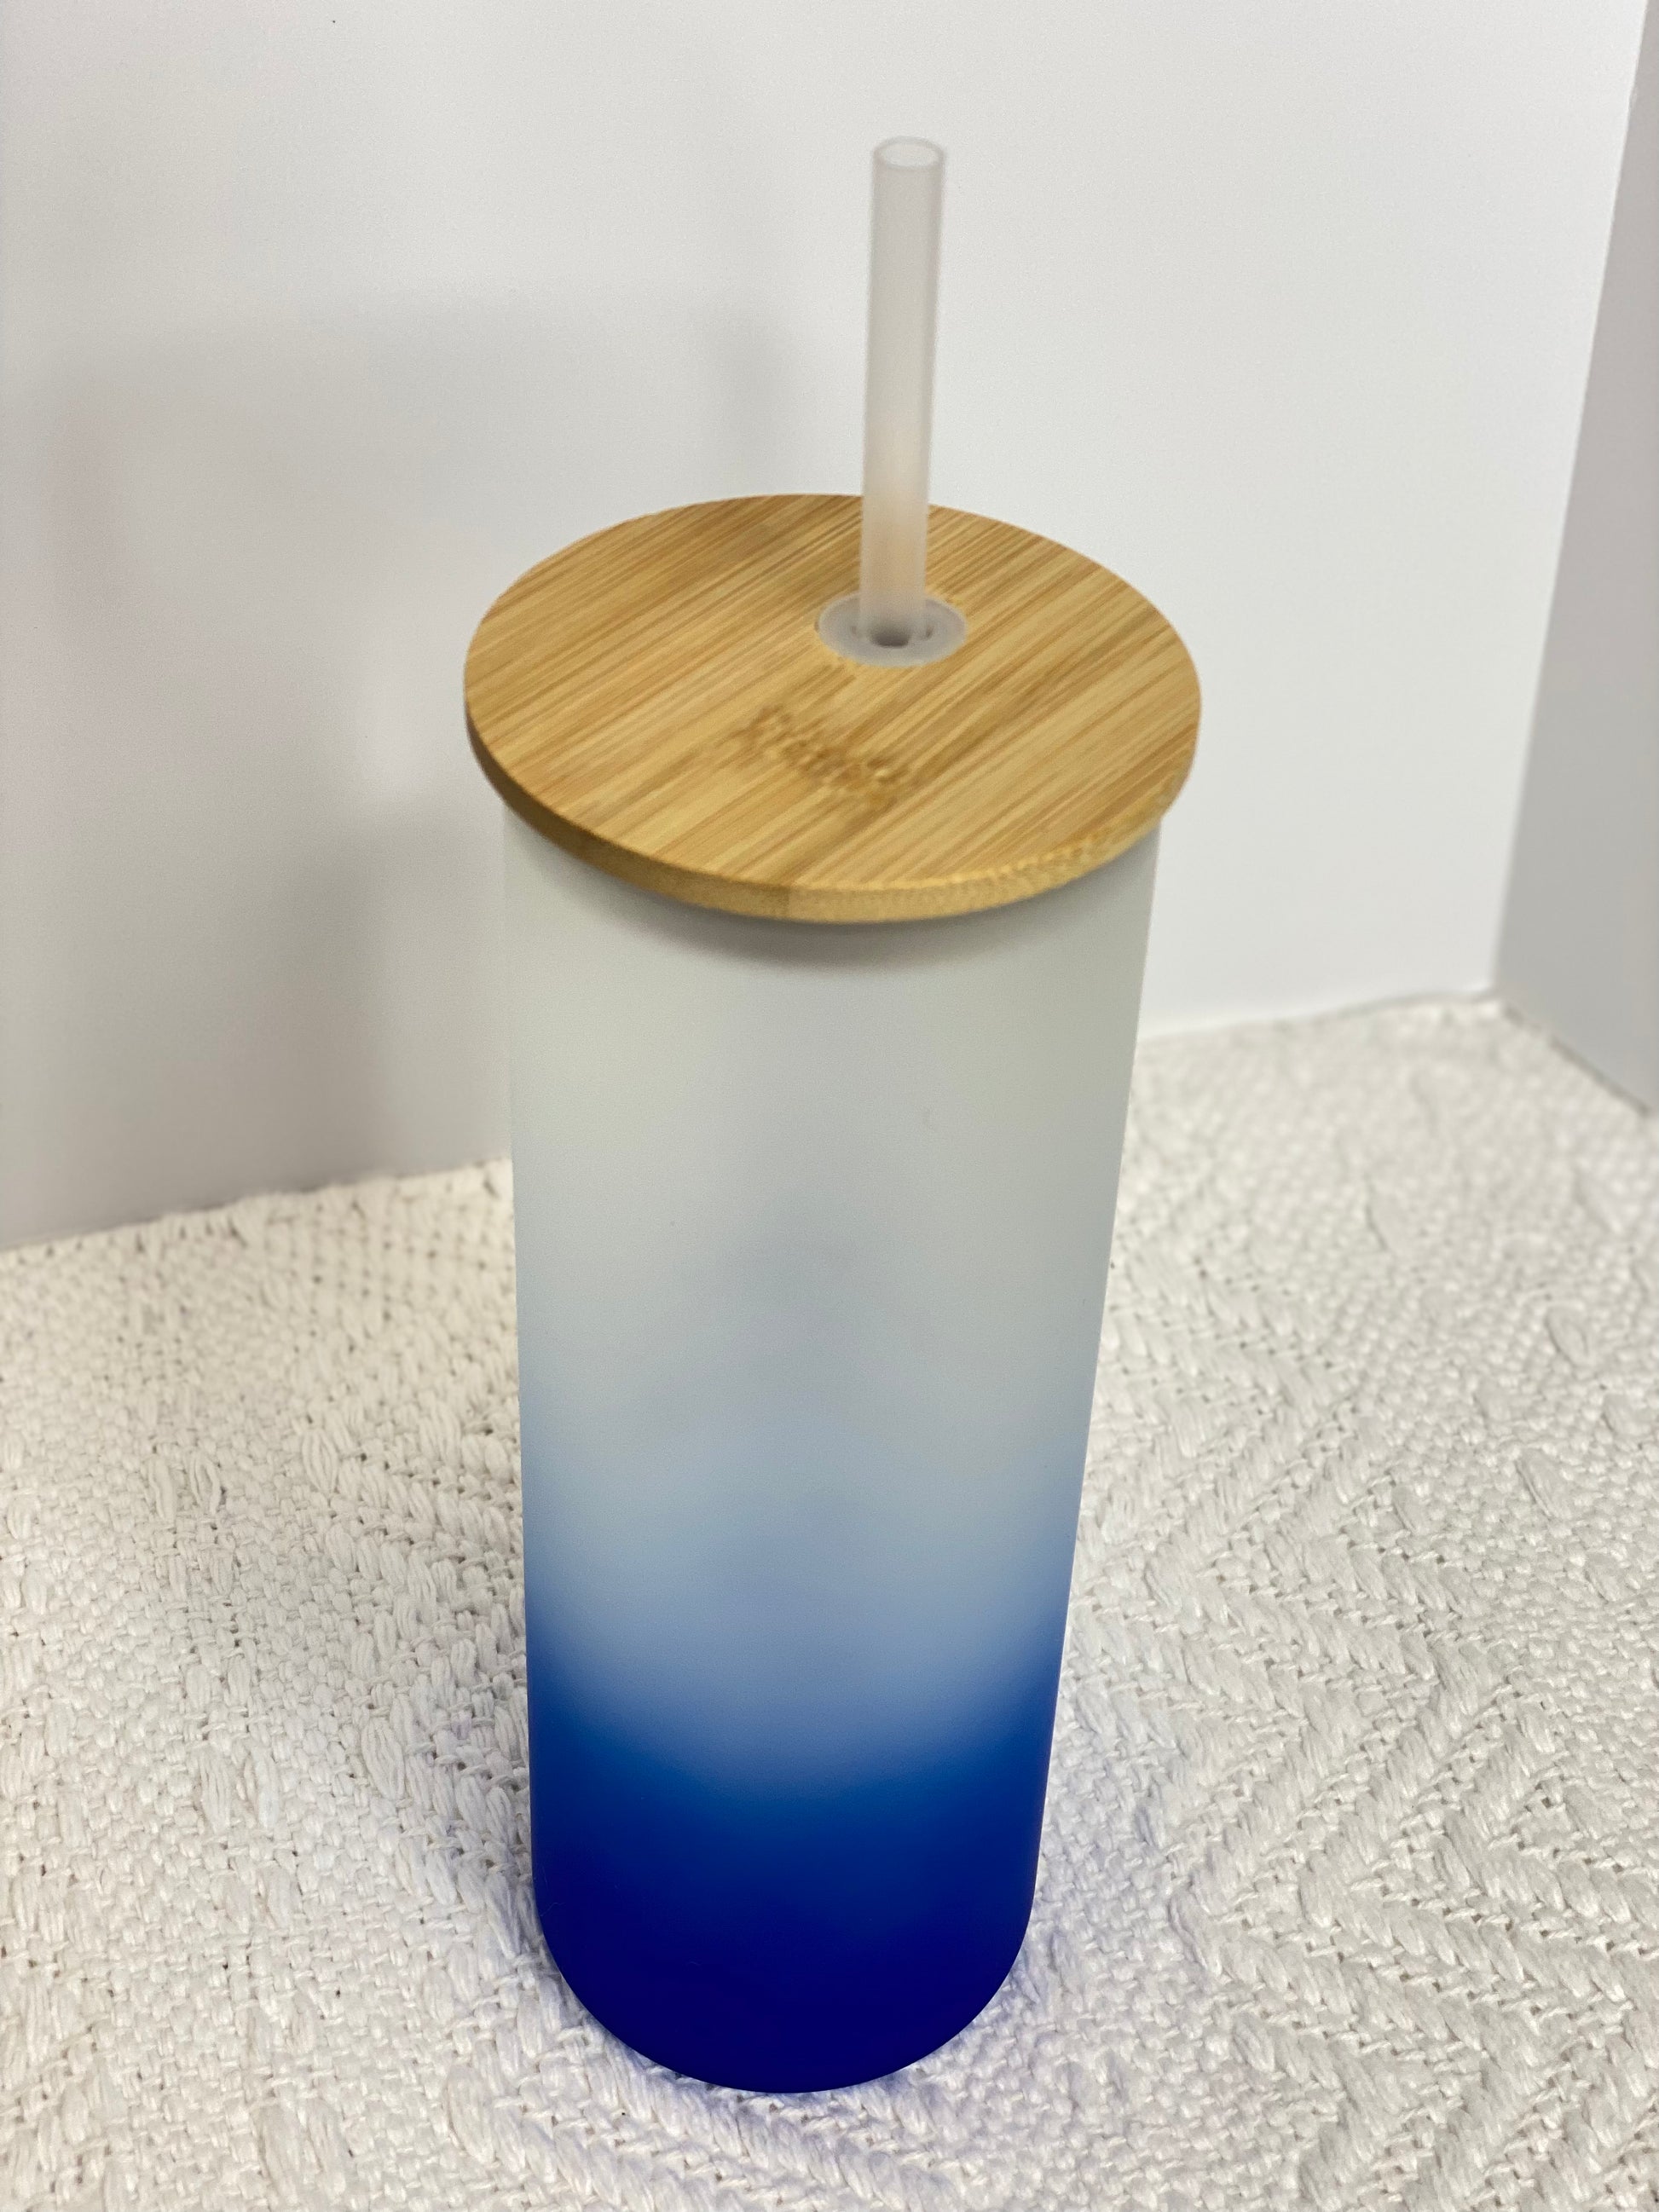 24 oz Ombre Chilly Tumbler Sky Blue Ombre